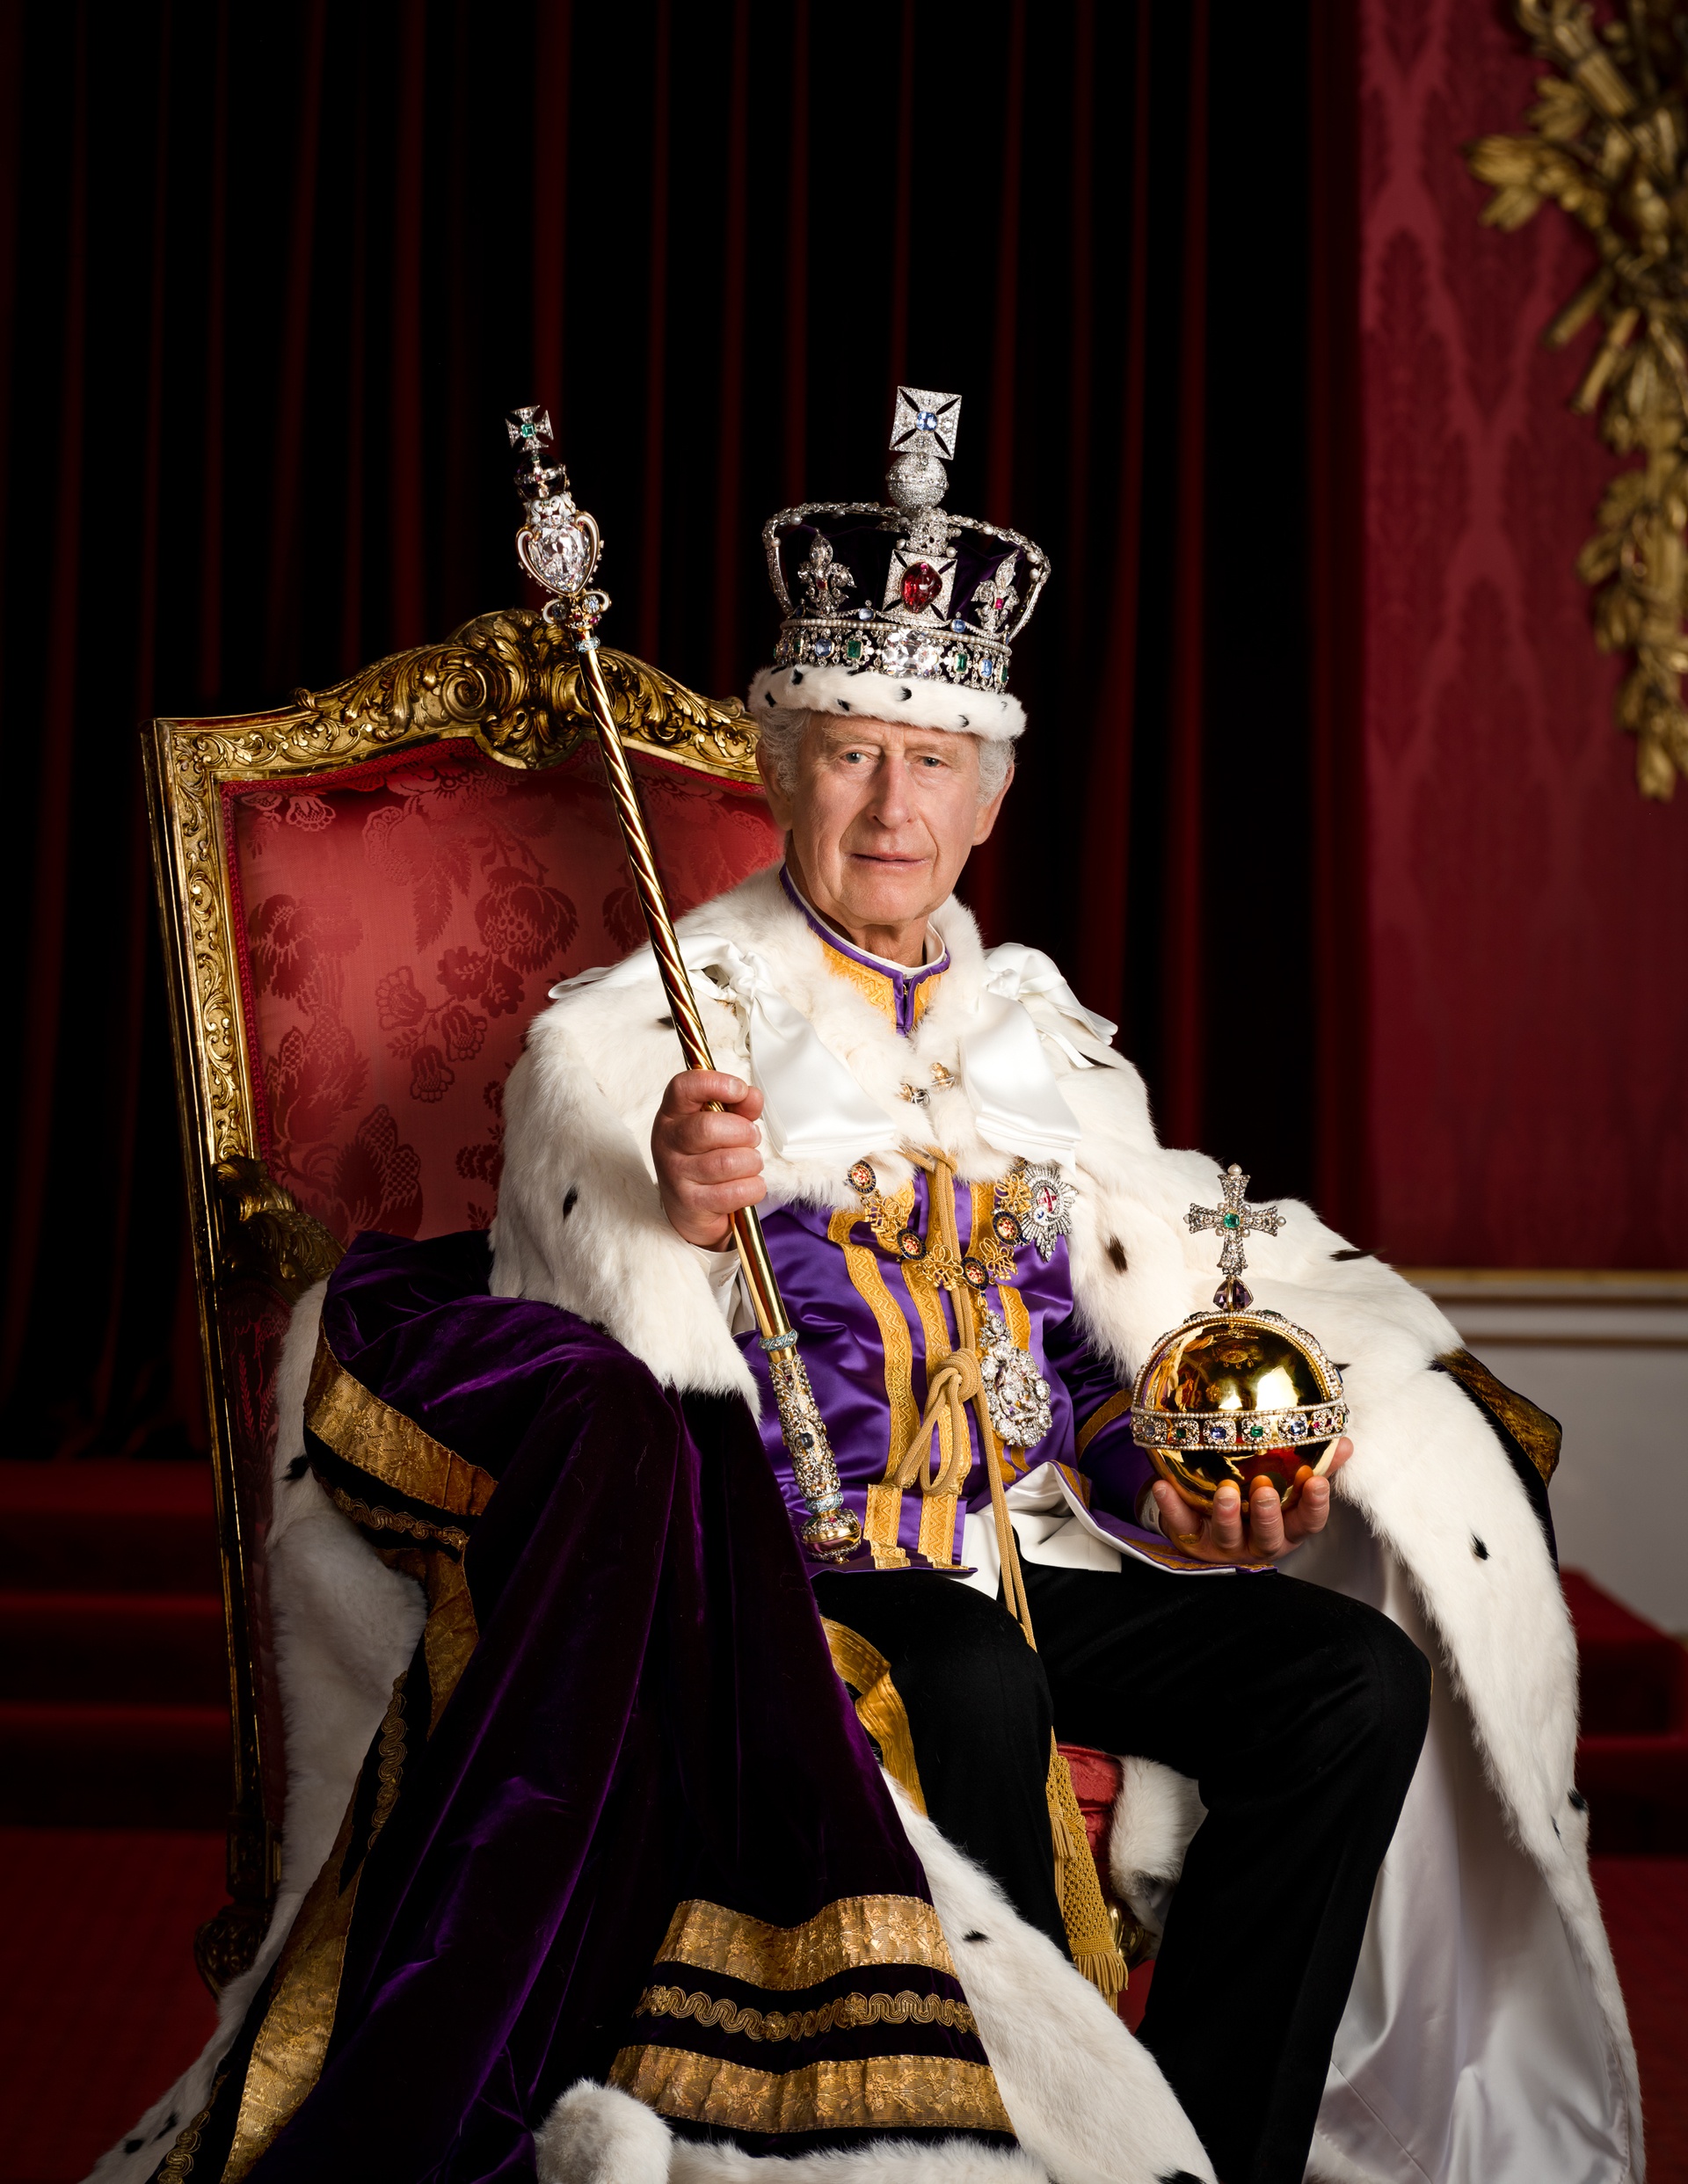 His Majesty King Charles pictured in full regalia in the Throne Room at Buckingham Palace.